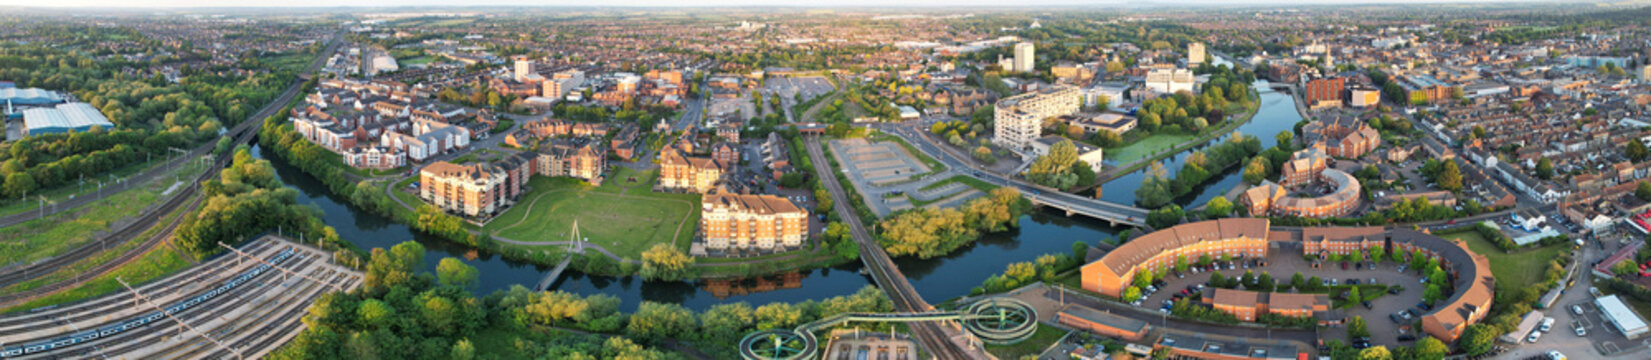 Gorgeous Aerial View of Central Bedford City of England Great Britain of UK. The Downtown's photo Was Captured with Drone's Camera from Medium Altitude from River Great Ouse on 27-May-2023. 